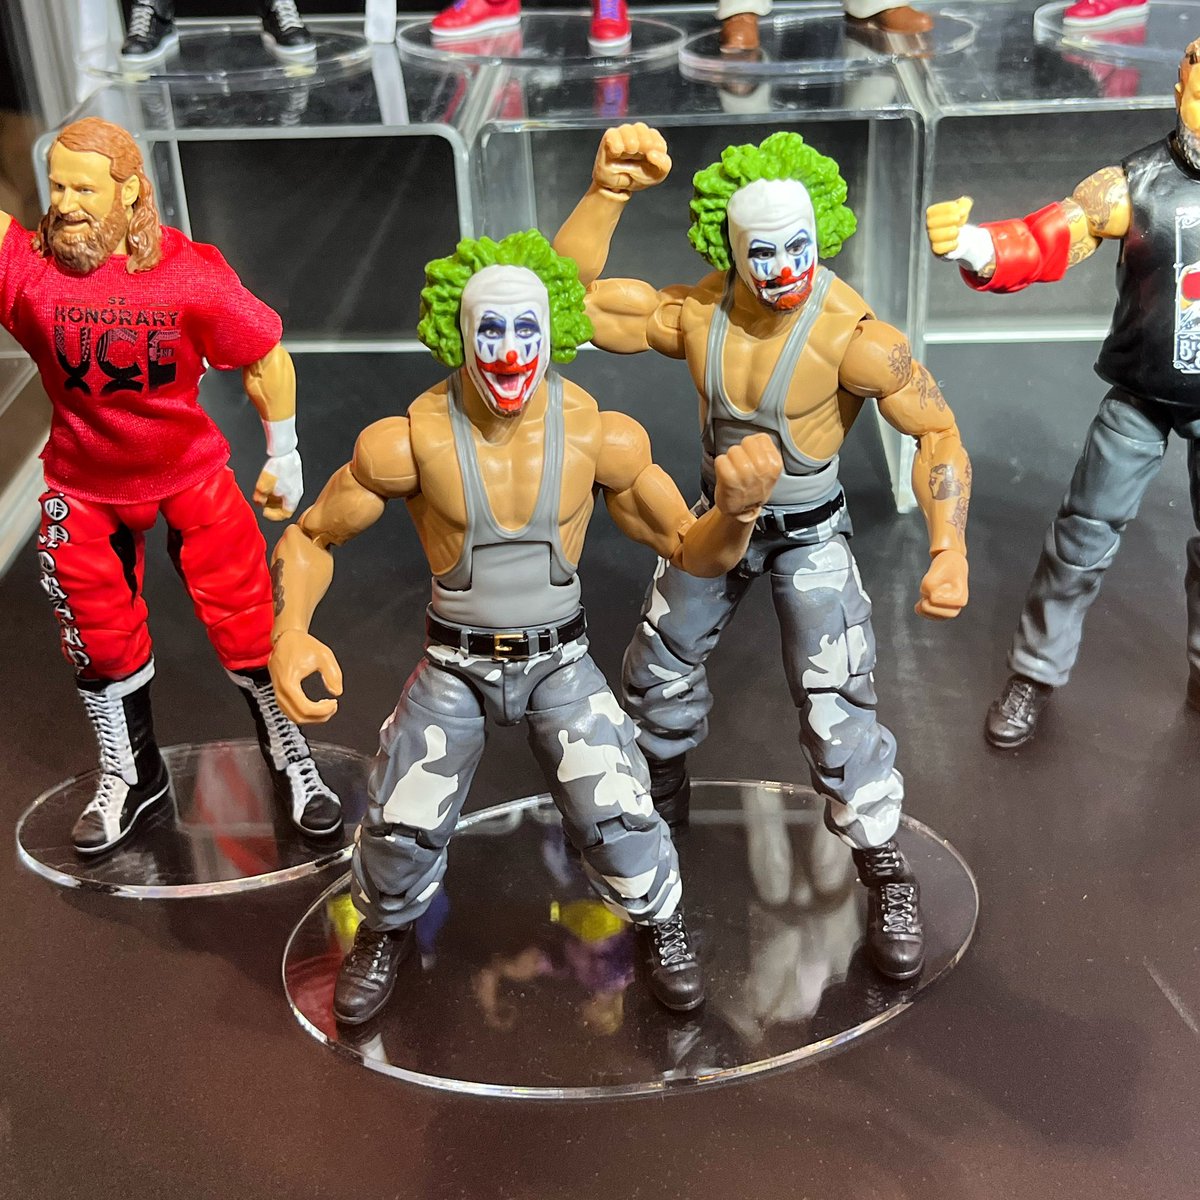 The new Bushwhackers Elites with additional Doink heads blew my mind!

#figheel #actionfigures #toycommunity #toycollector #wrestlingfigures #wwe #aew #njpw #tna